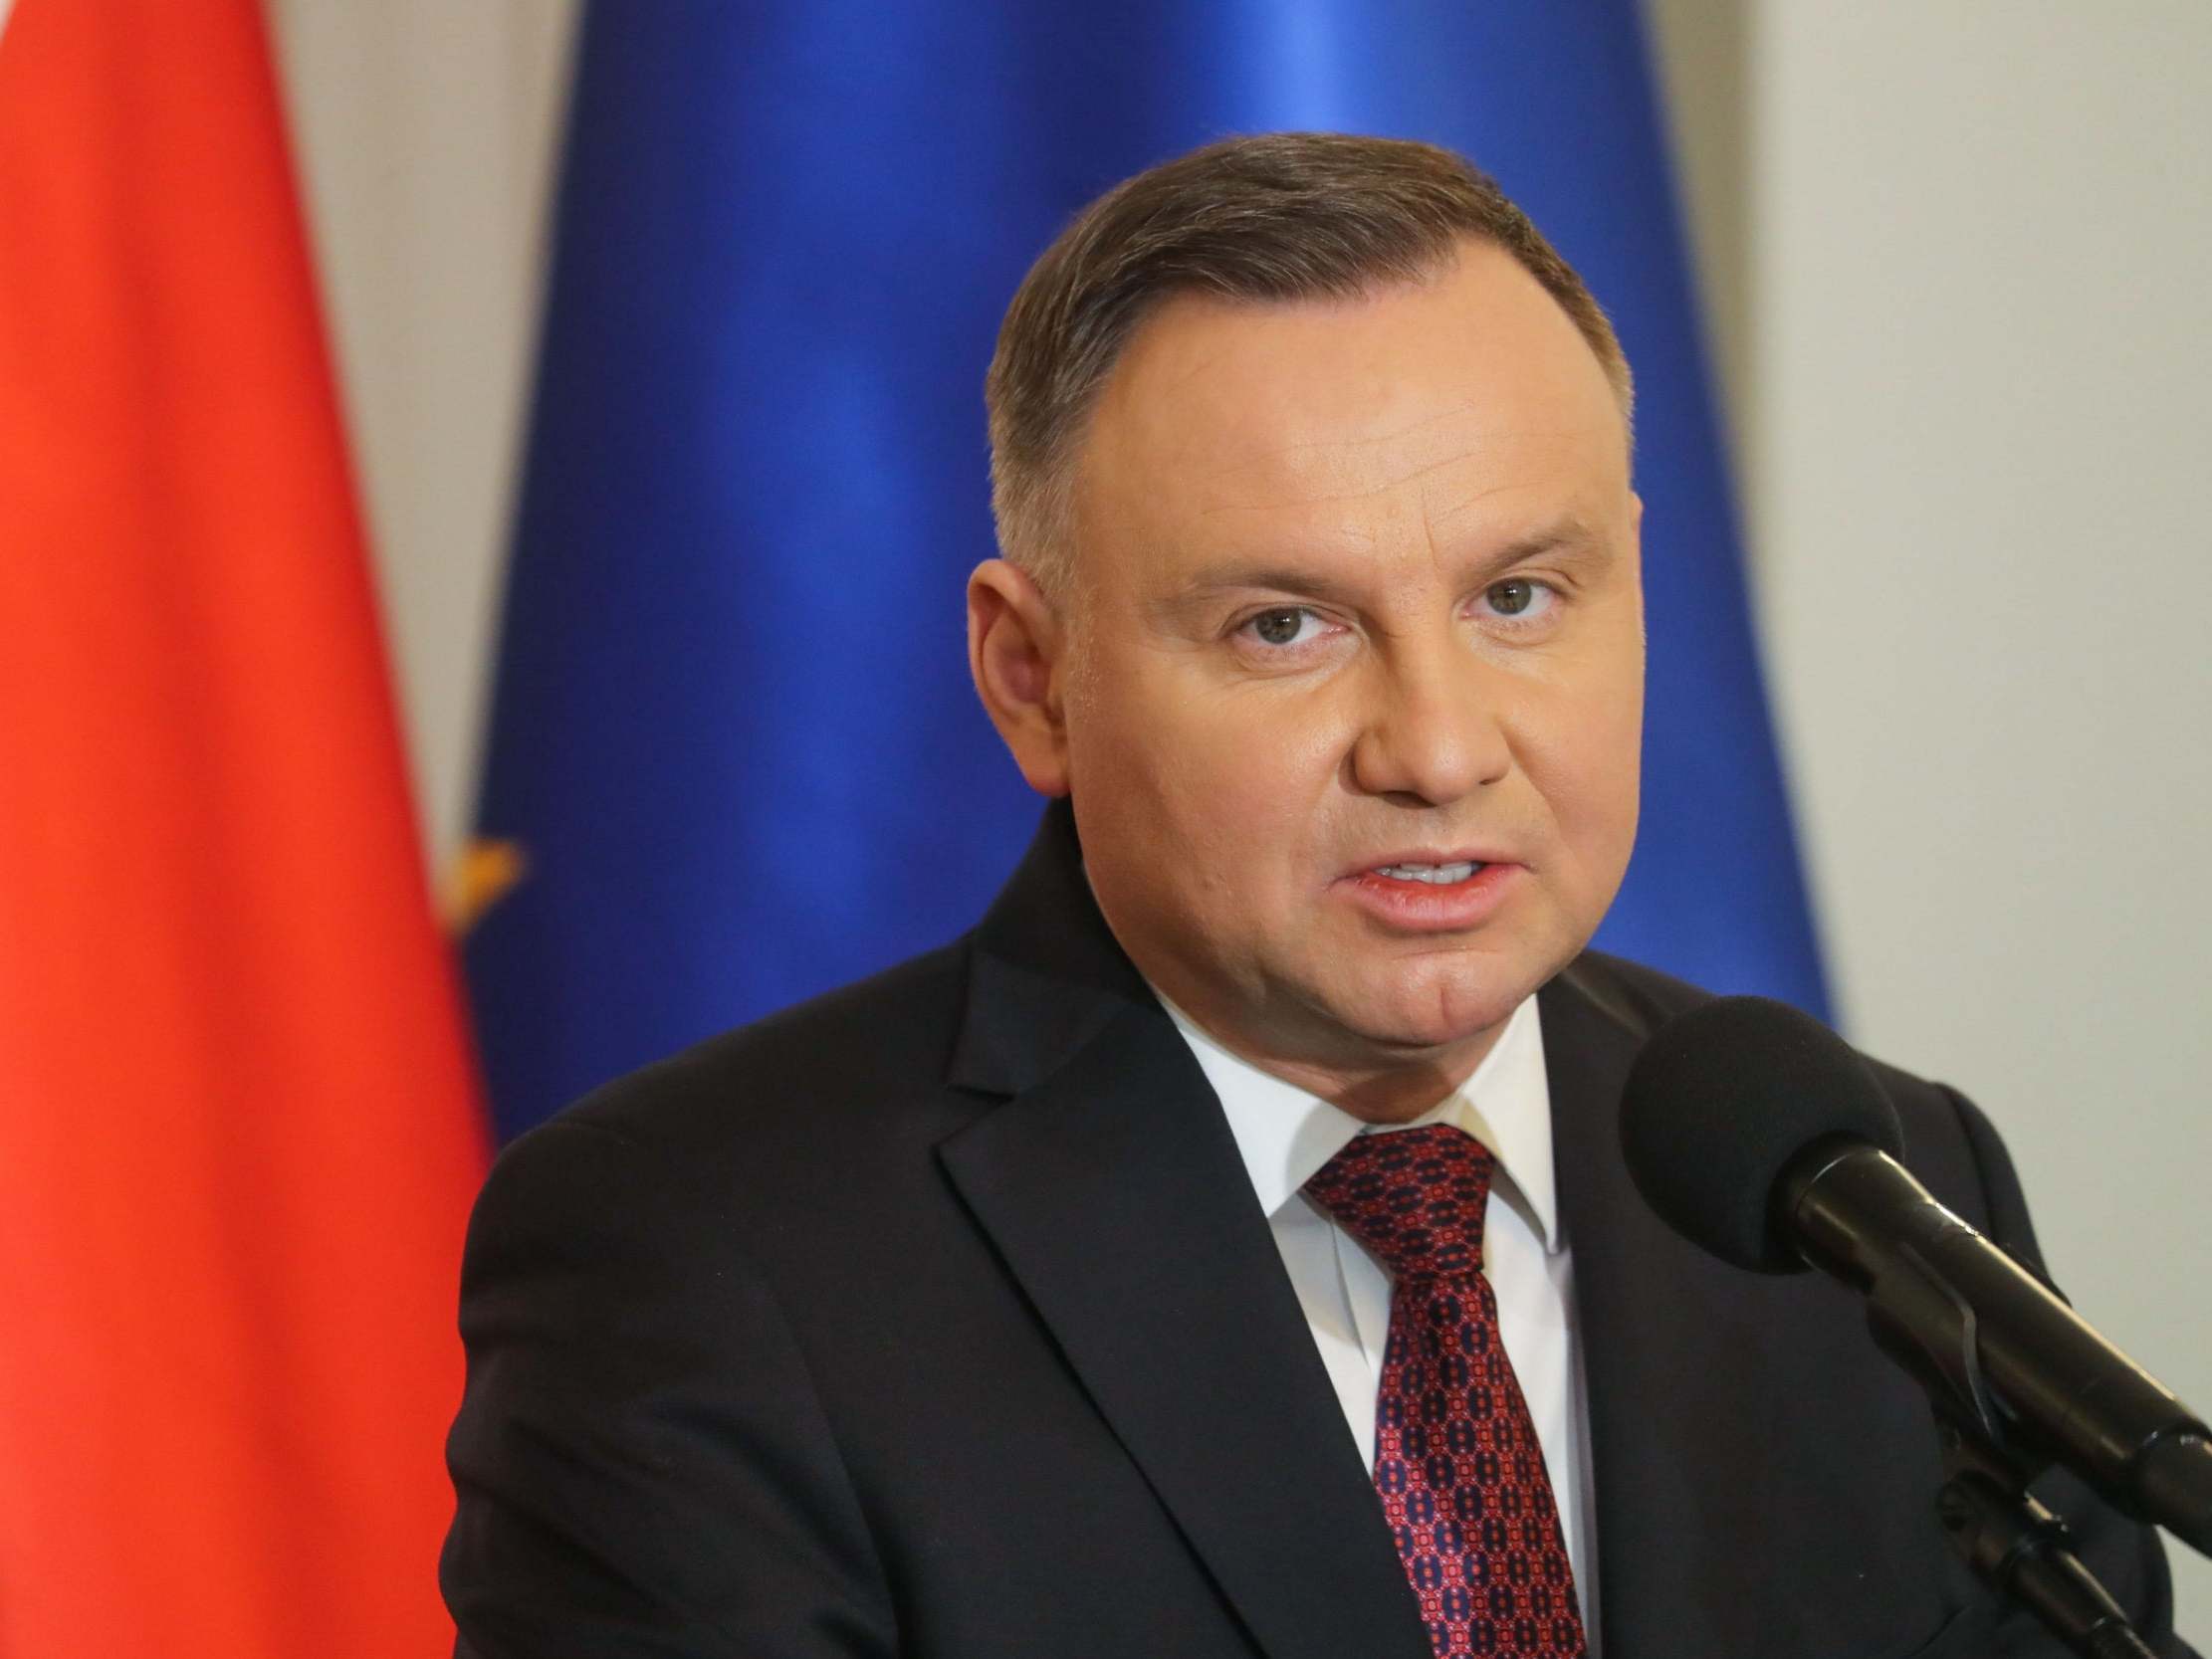 Poland's president Andrzej Duda was expected to win a landslide in the election which was scheduled for Sunday